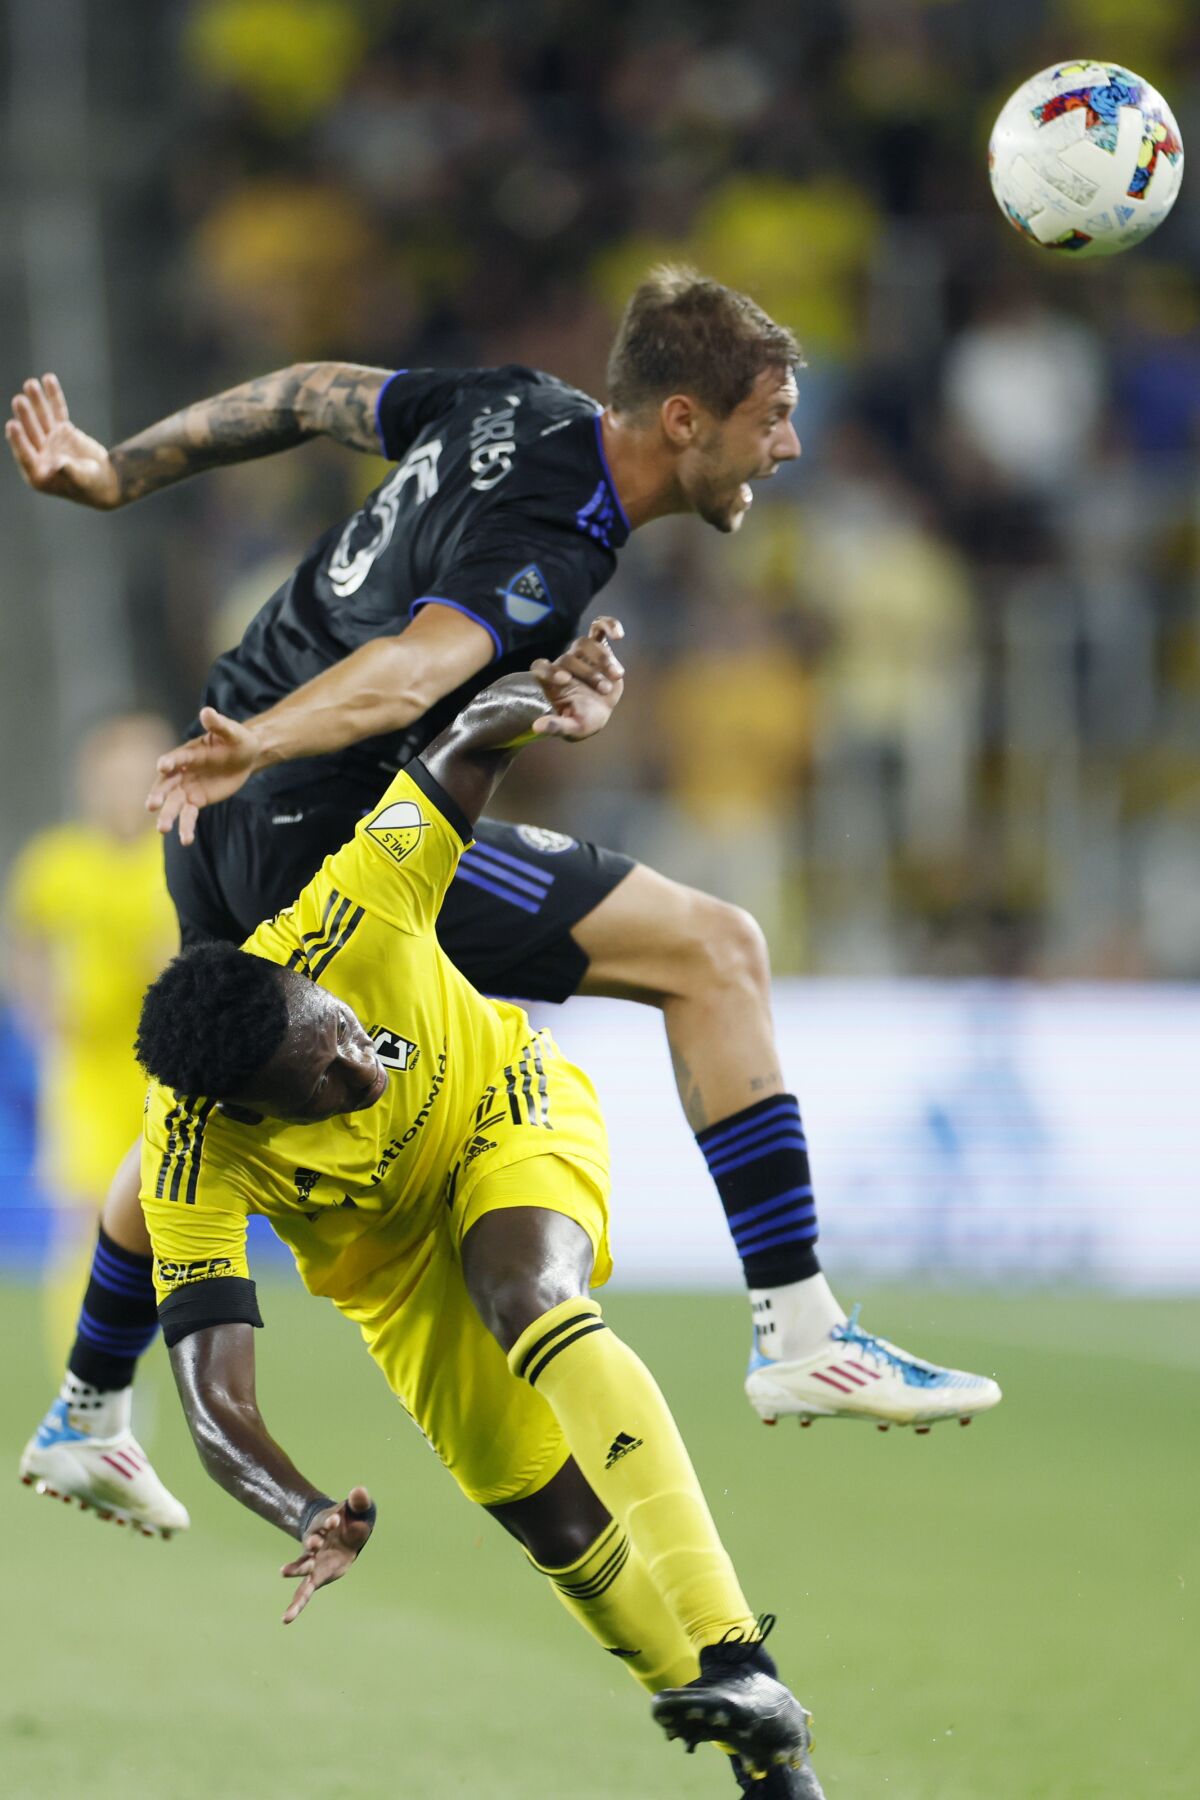 CF Montreal's Gabriele Corbo, top, heads the ball away from Columbus Crew's Derick Etienne during the second half of an MLS soccer match Wednesday, Aug. 3, 2022, in Columbus, Ohio. (AP Photo/Jay LaPrete)